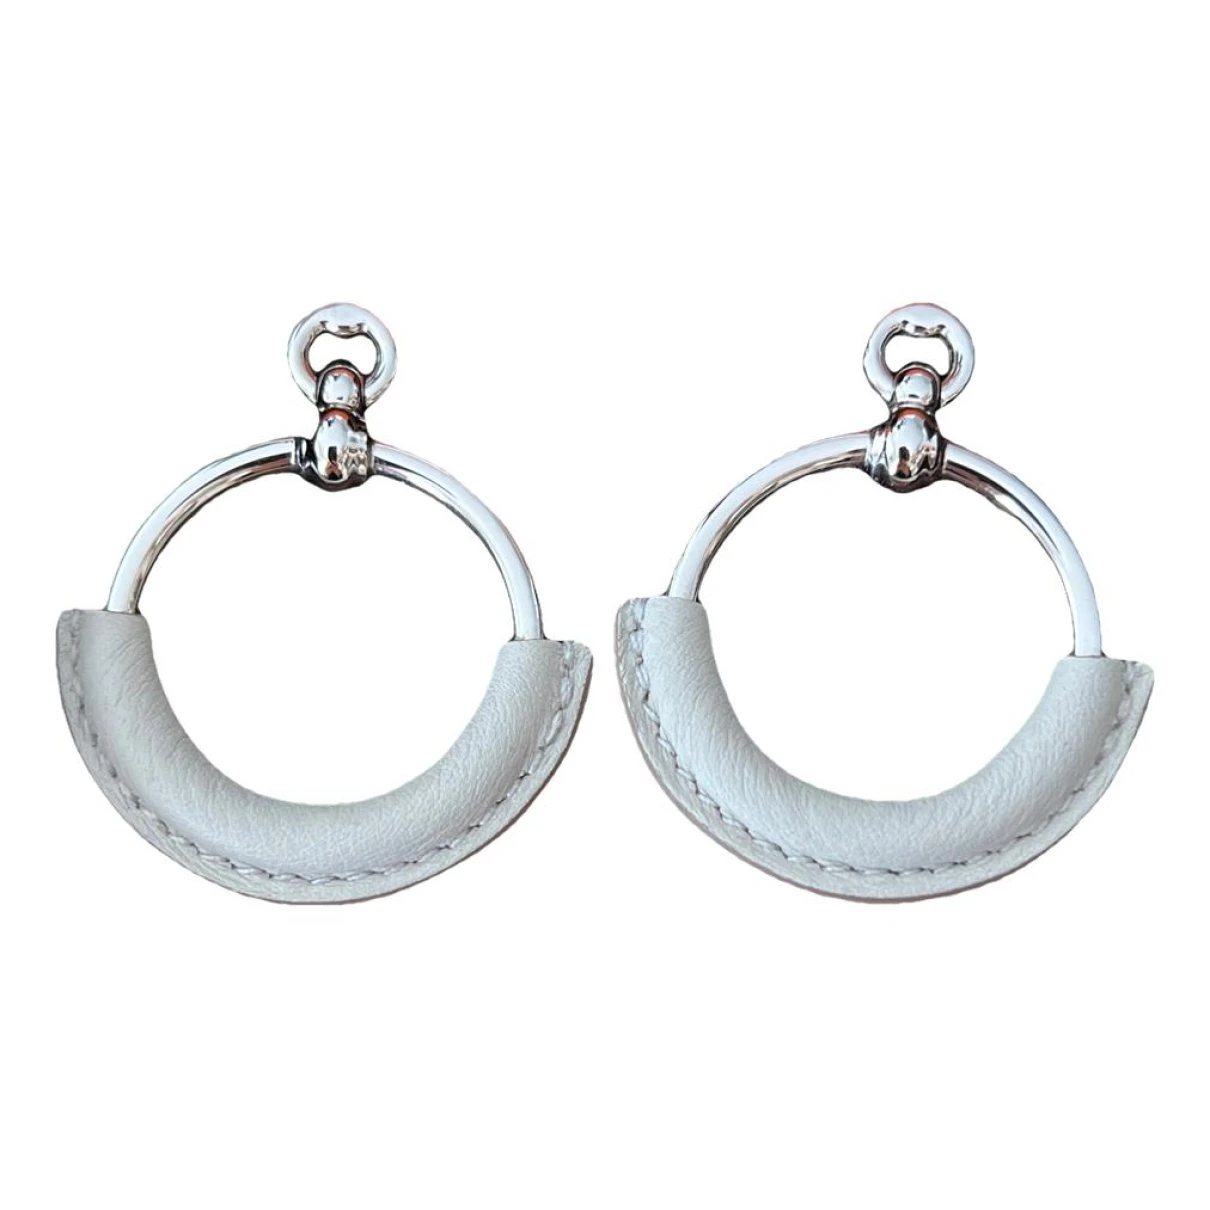 jewellery Hermès earrings Loop for Female Leather. Used condition